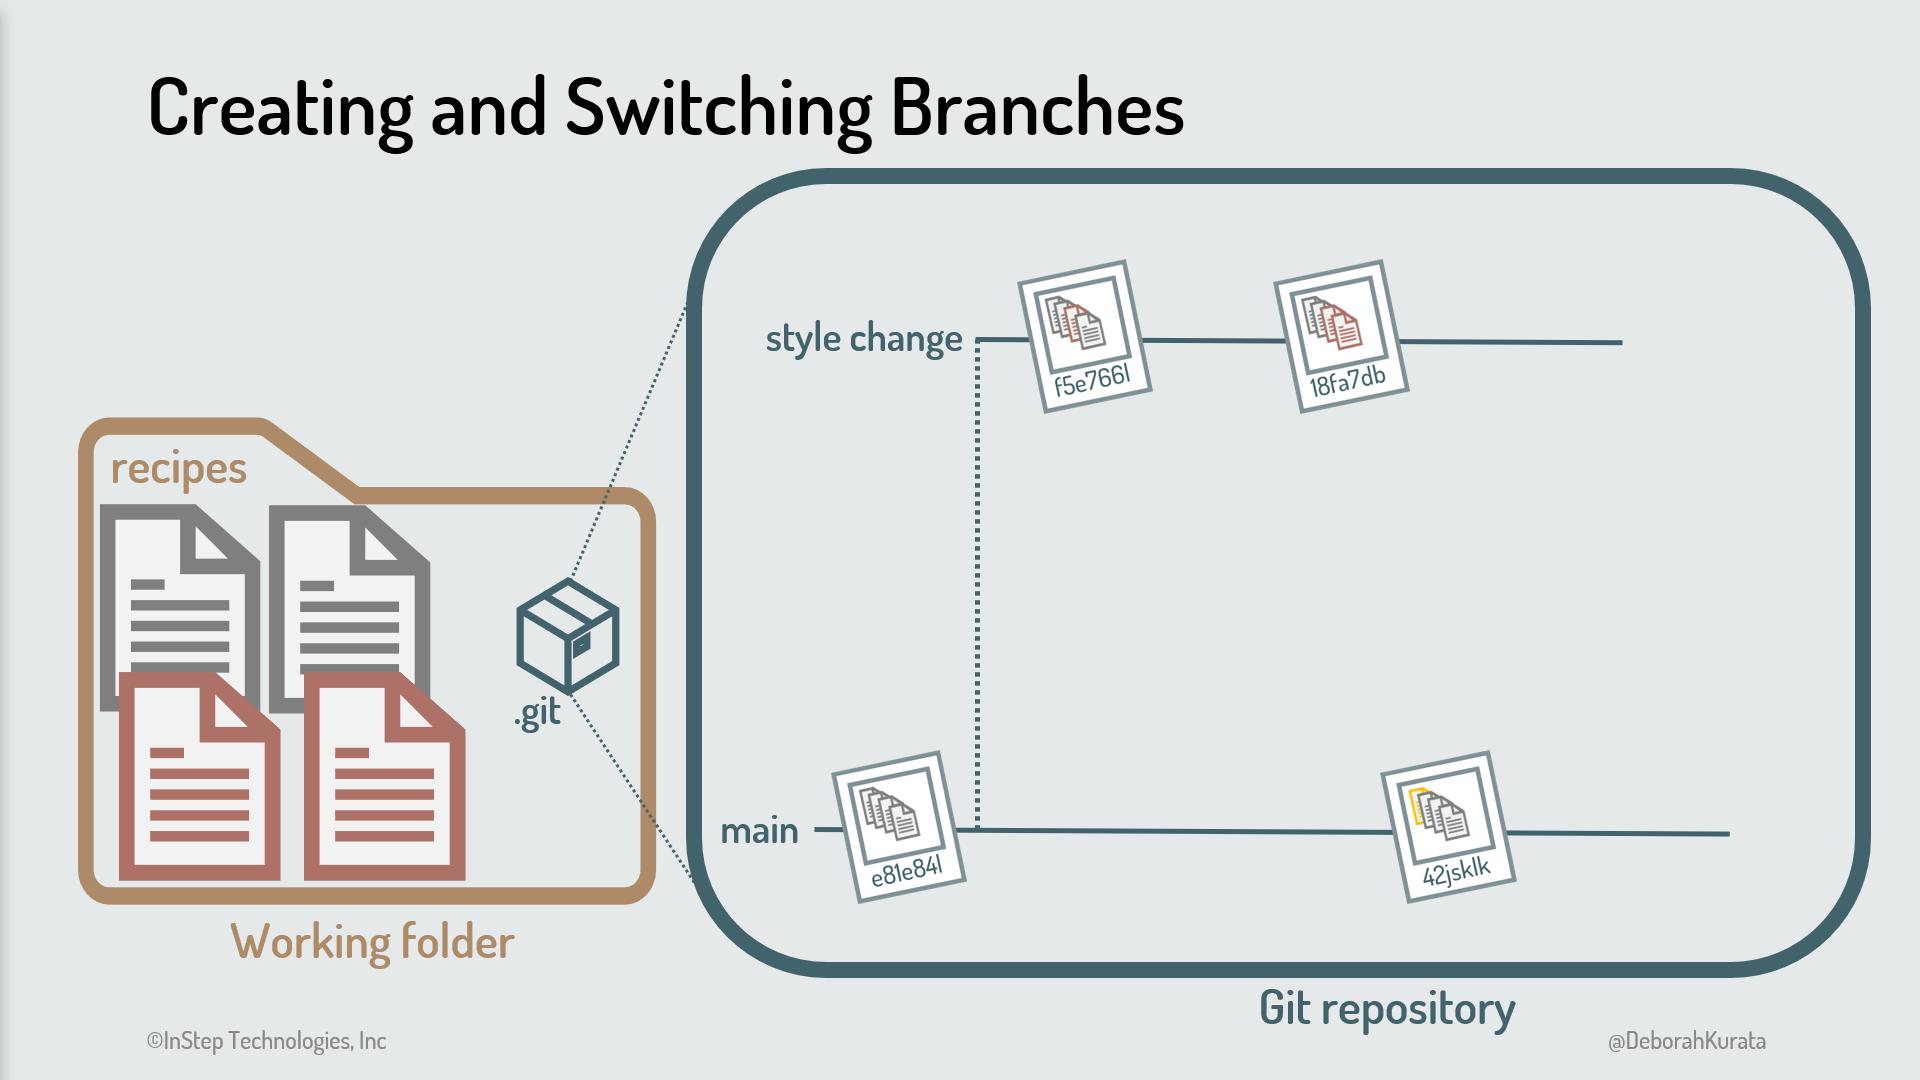 Working folder on the left. Git repository showing "style change" branch commits